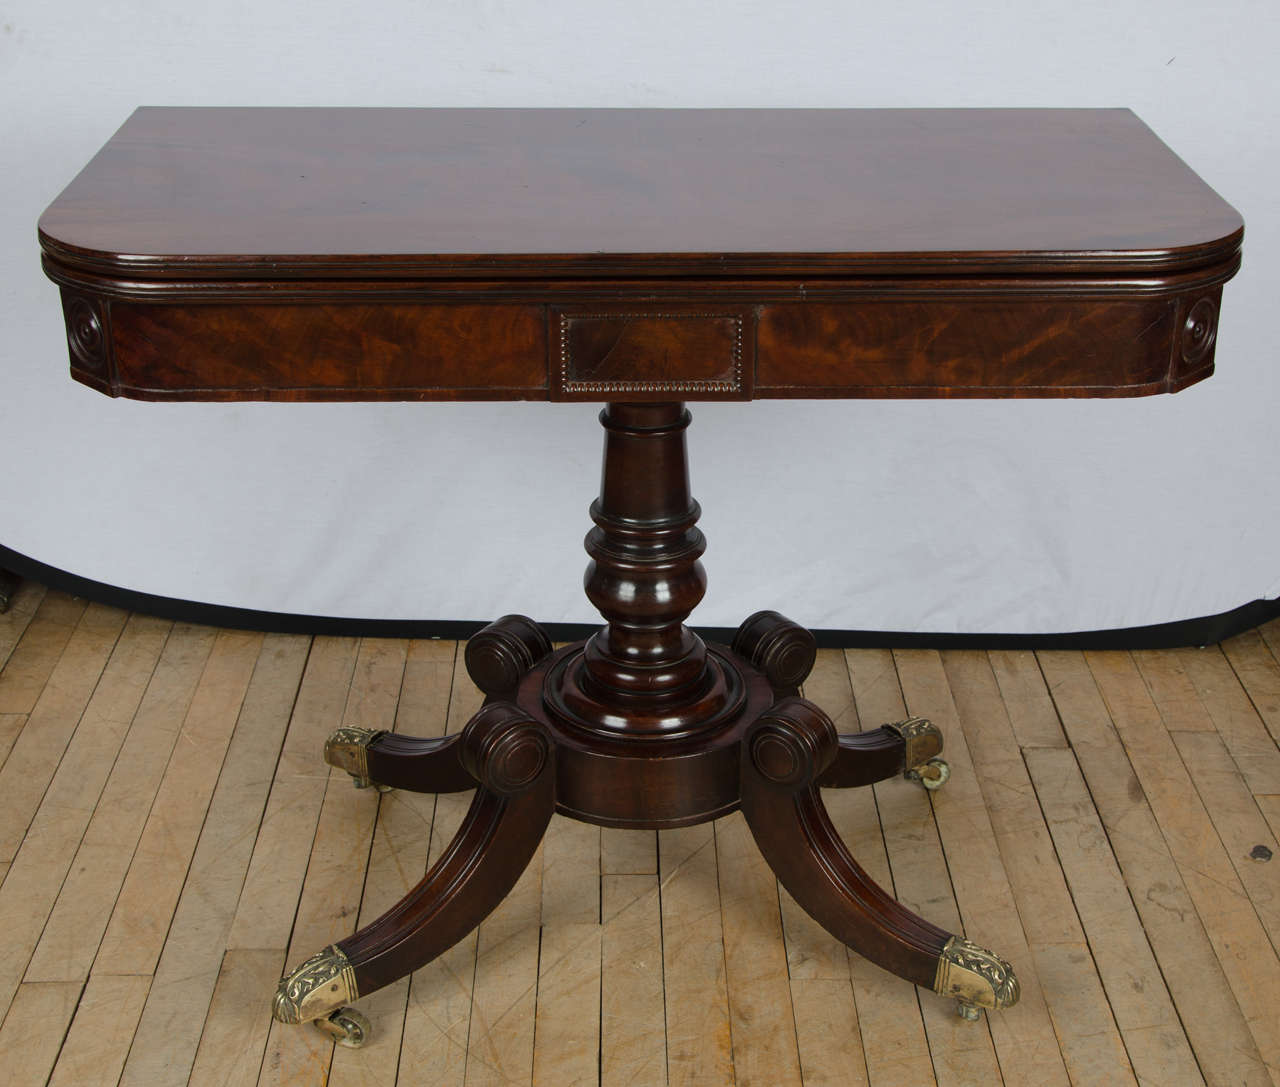 This late Regency mahogany tea table has 4 sweeping legs from a central circular turned column support and is finished with finely cast brass feet.  The table features a lovely patina top, both inside and out. It measures 36 in – 91 cm wide and 29